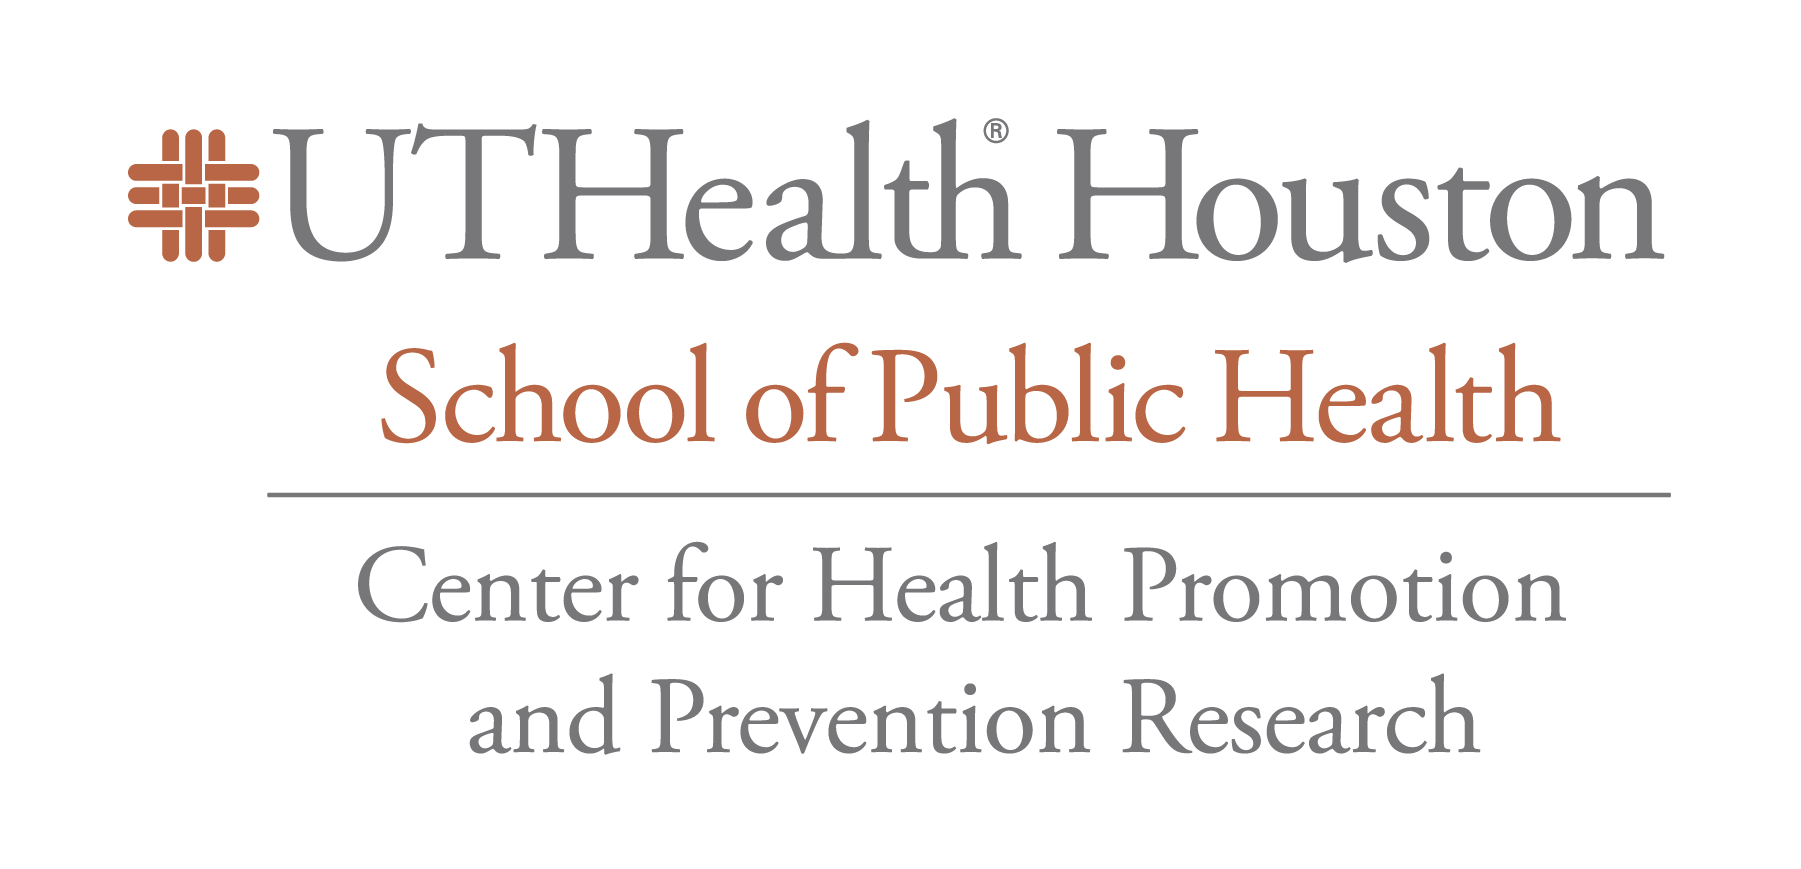 University of Texas Health Science Center at Houston, Center for Health Promotion and Prevention Research logo